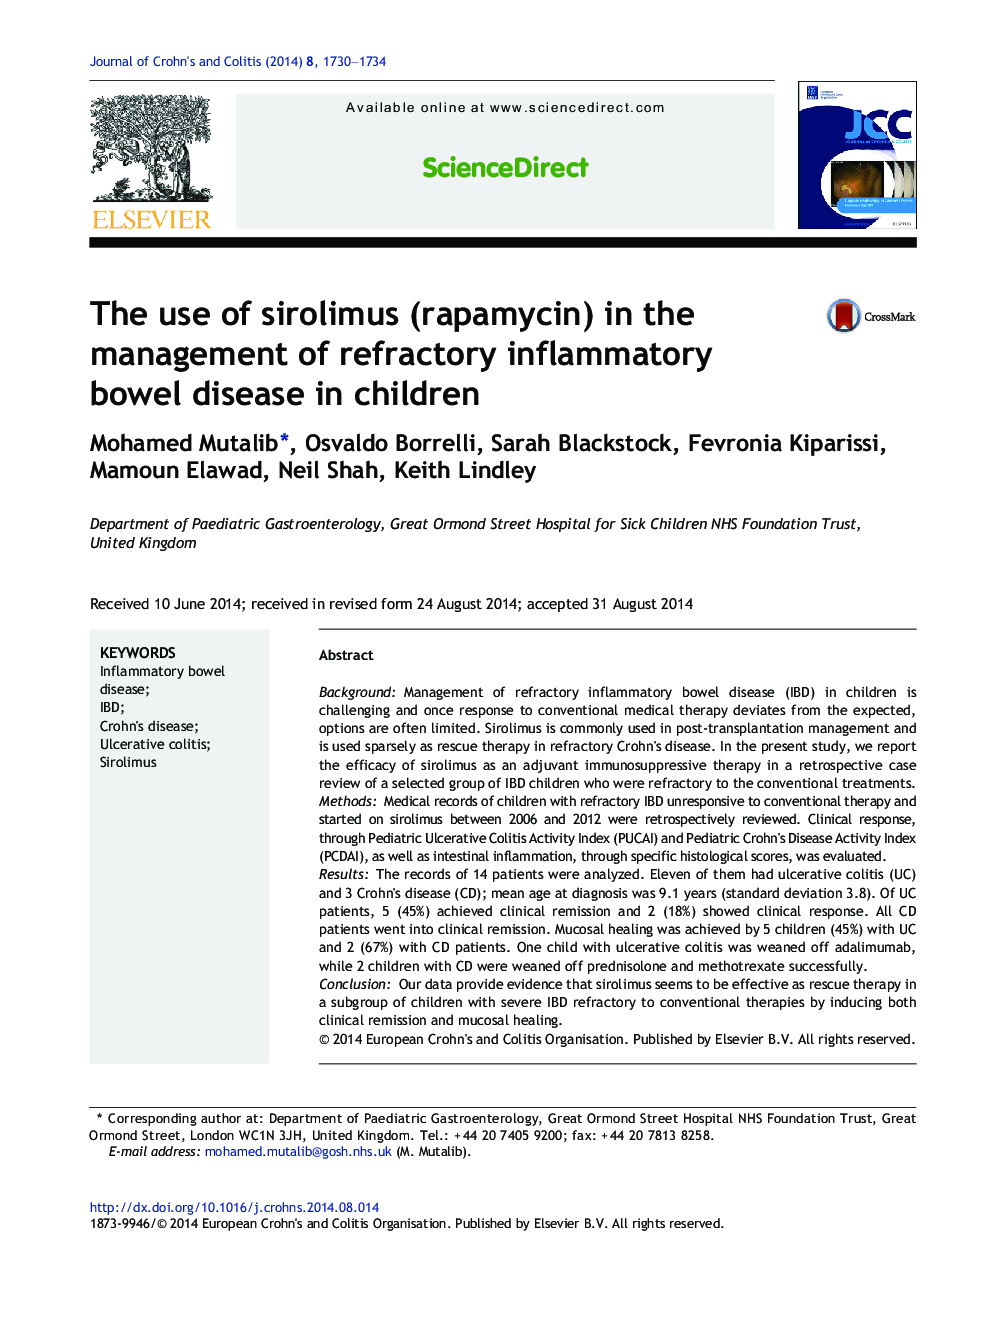 The use of sirolimus (rapamycin) in the management of refractory inflammatory bowel disease in children